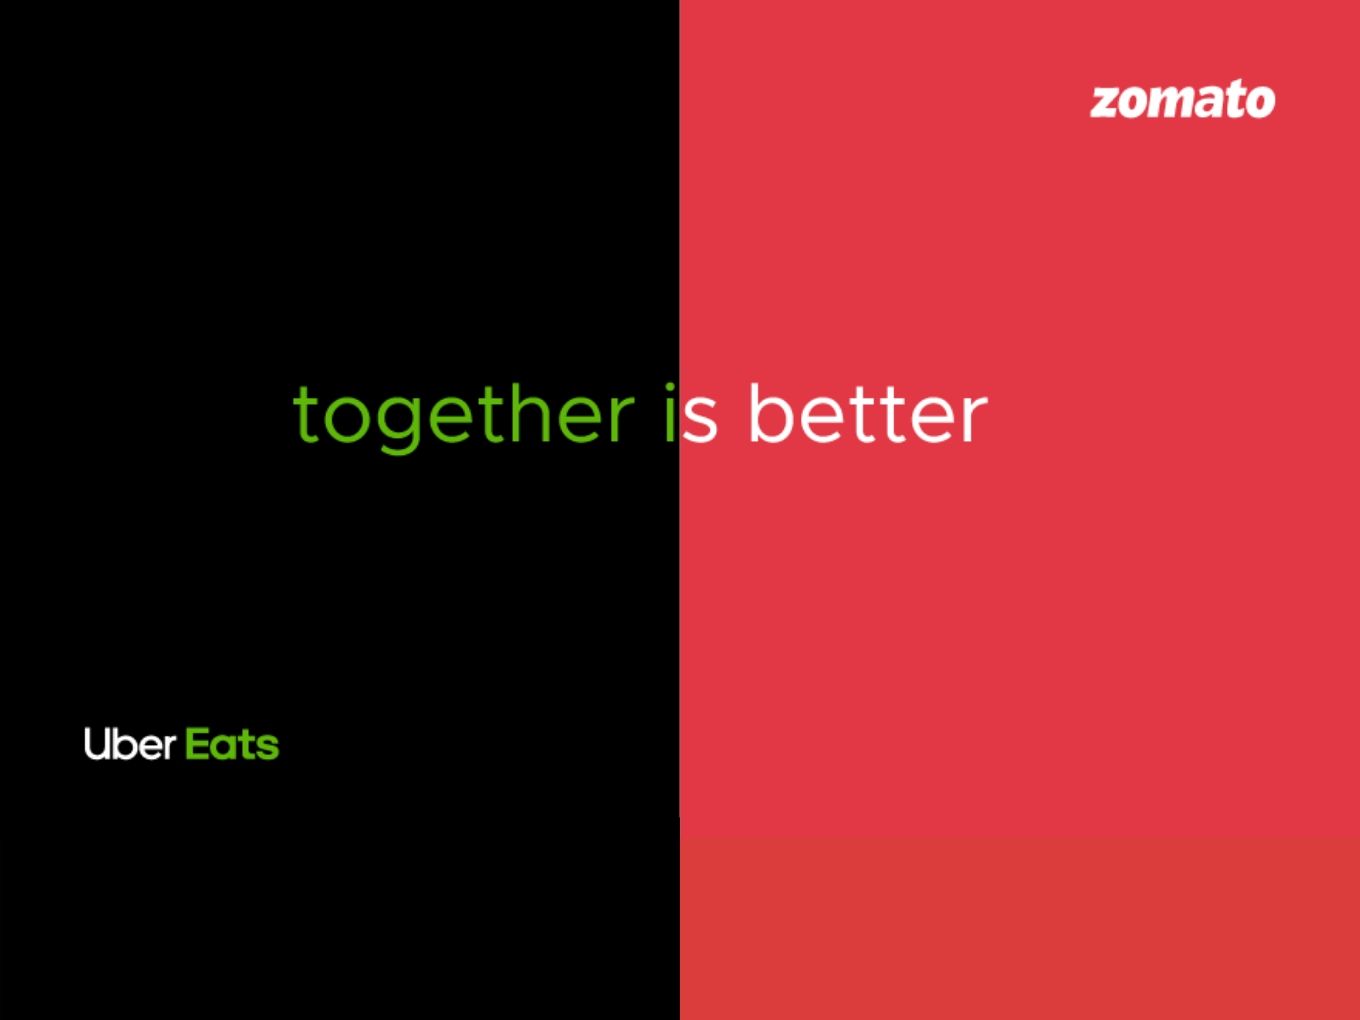 Zomato Uber Eats Acquisition: Was It All For Brand value?